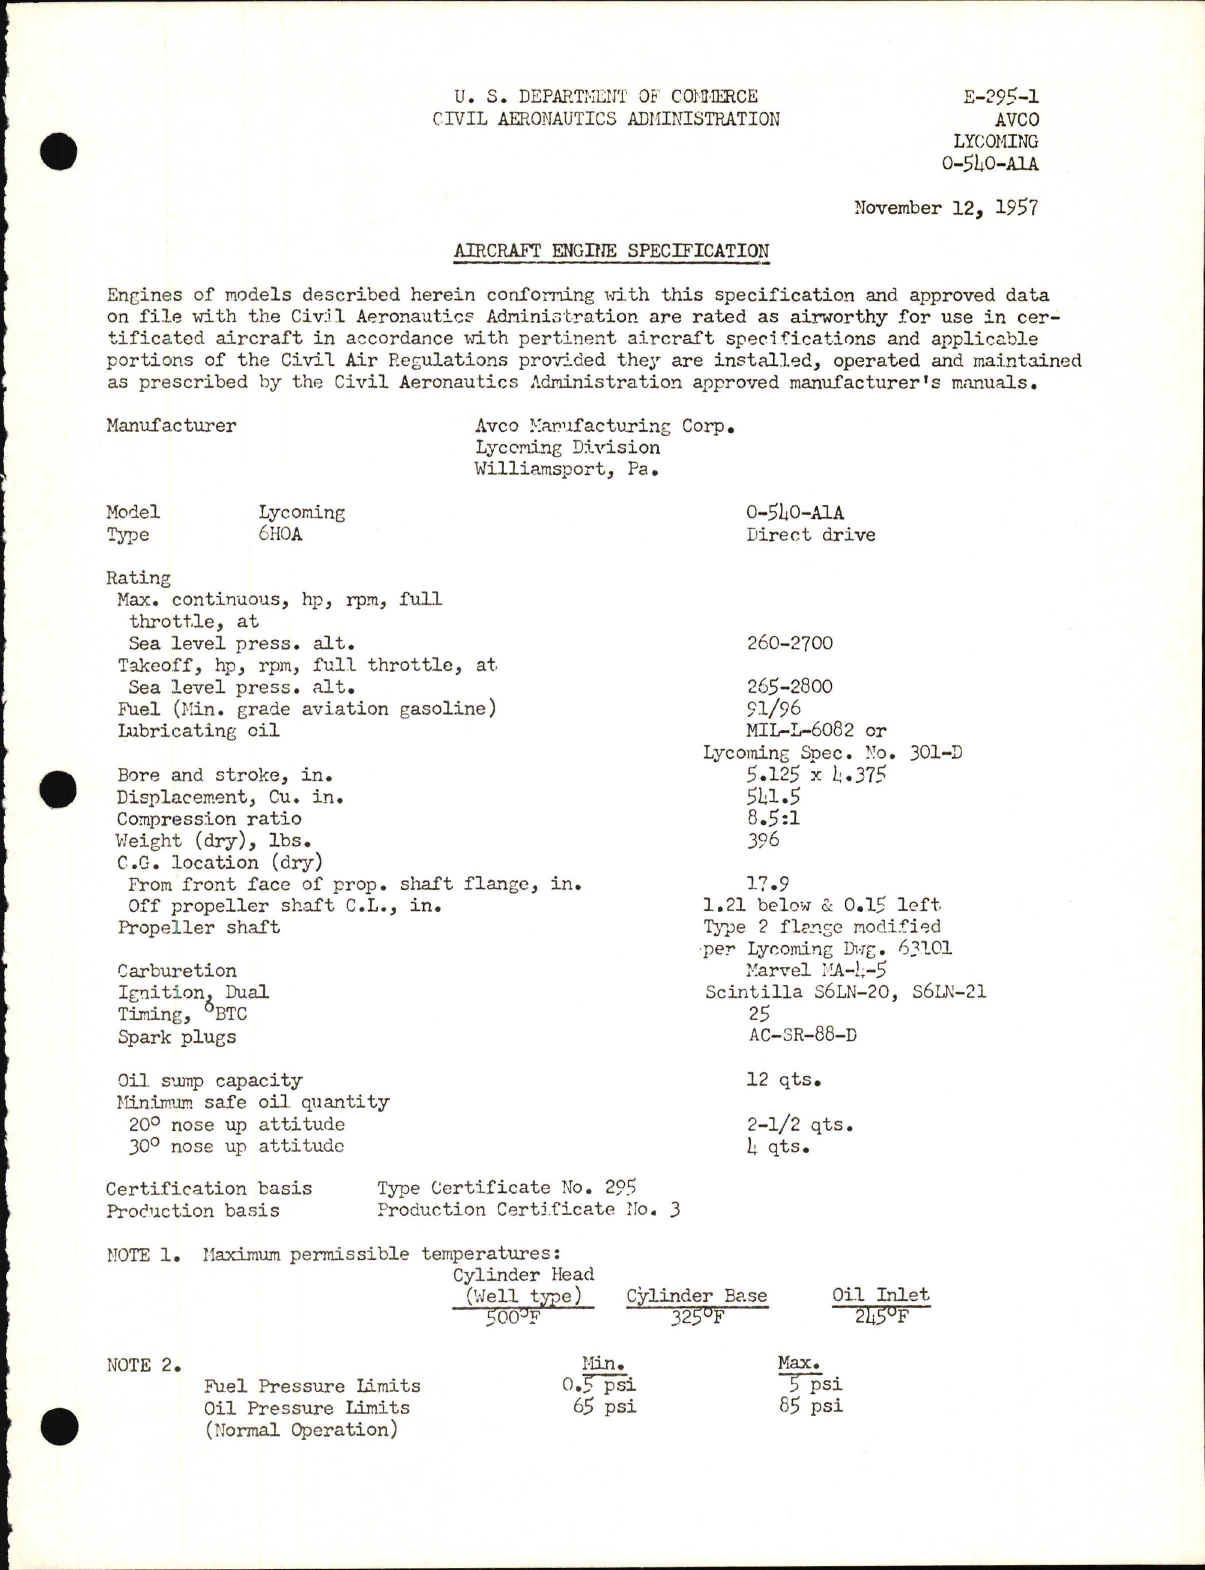 Sample page 1 from AirCorps Library document: O-540-A1A